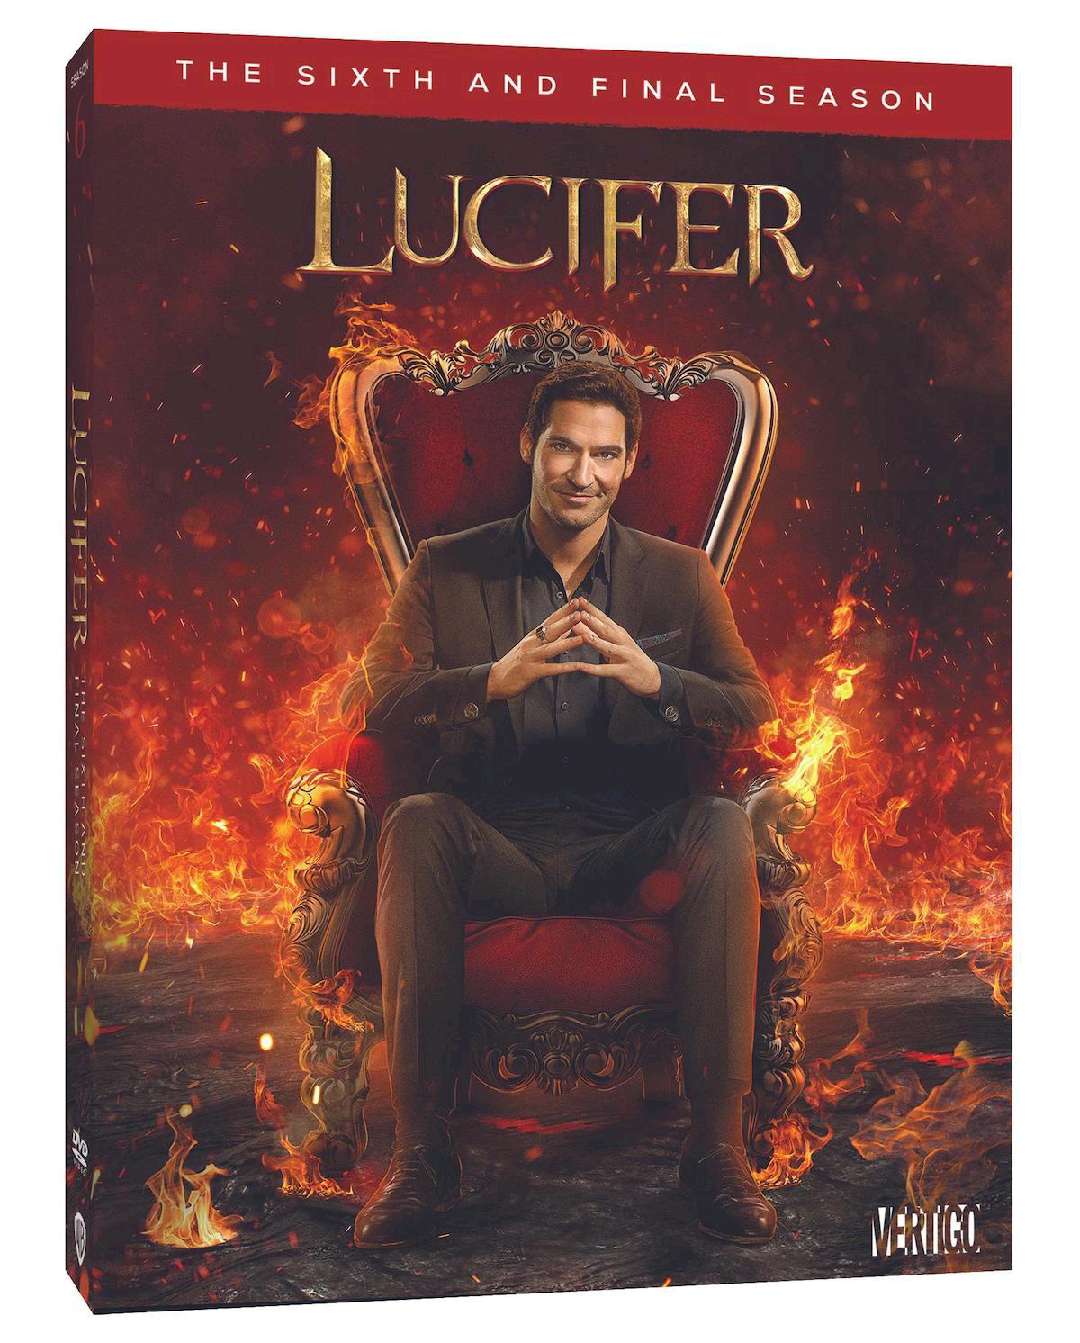 Lucifer' Fans Will Get a Special Treat One Year After Season 6's Release.